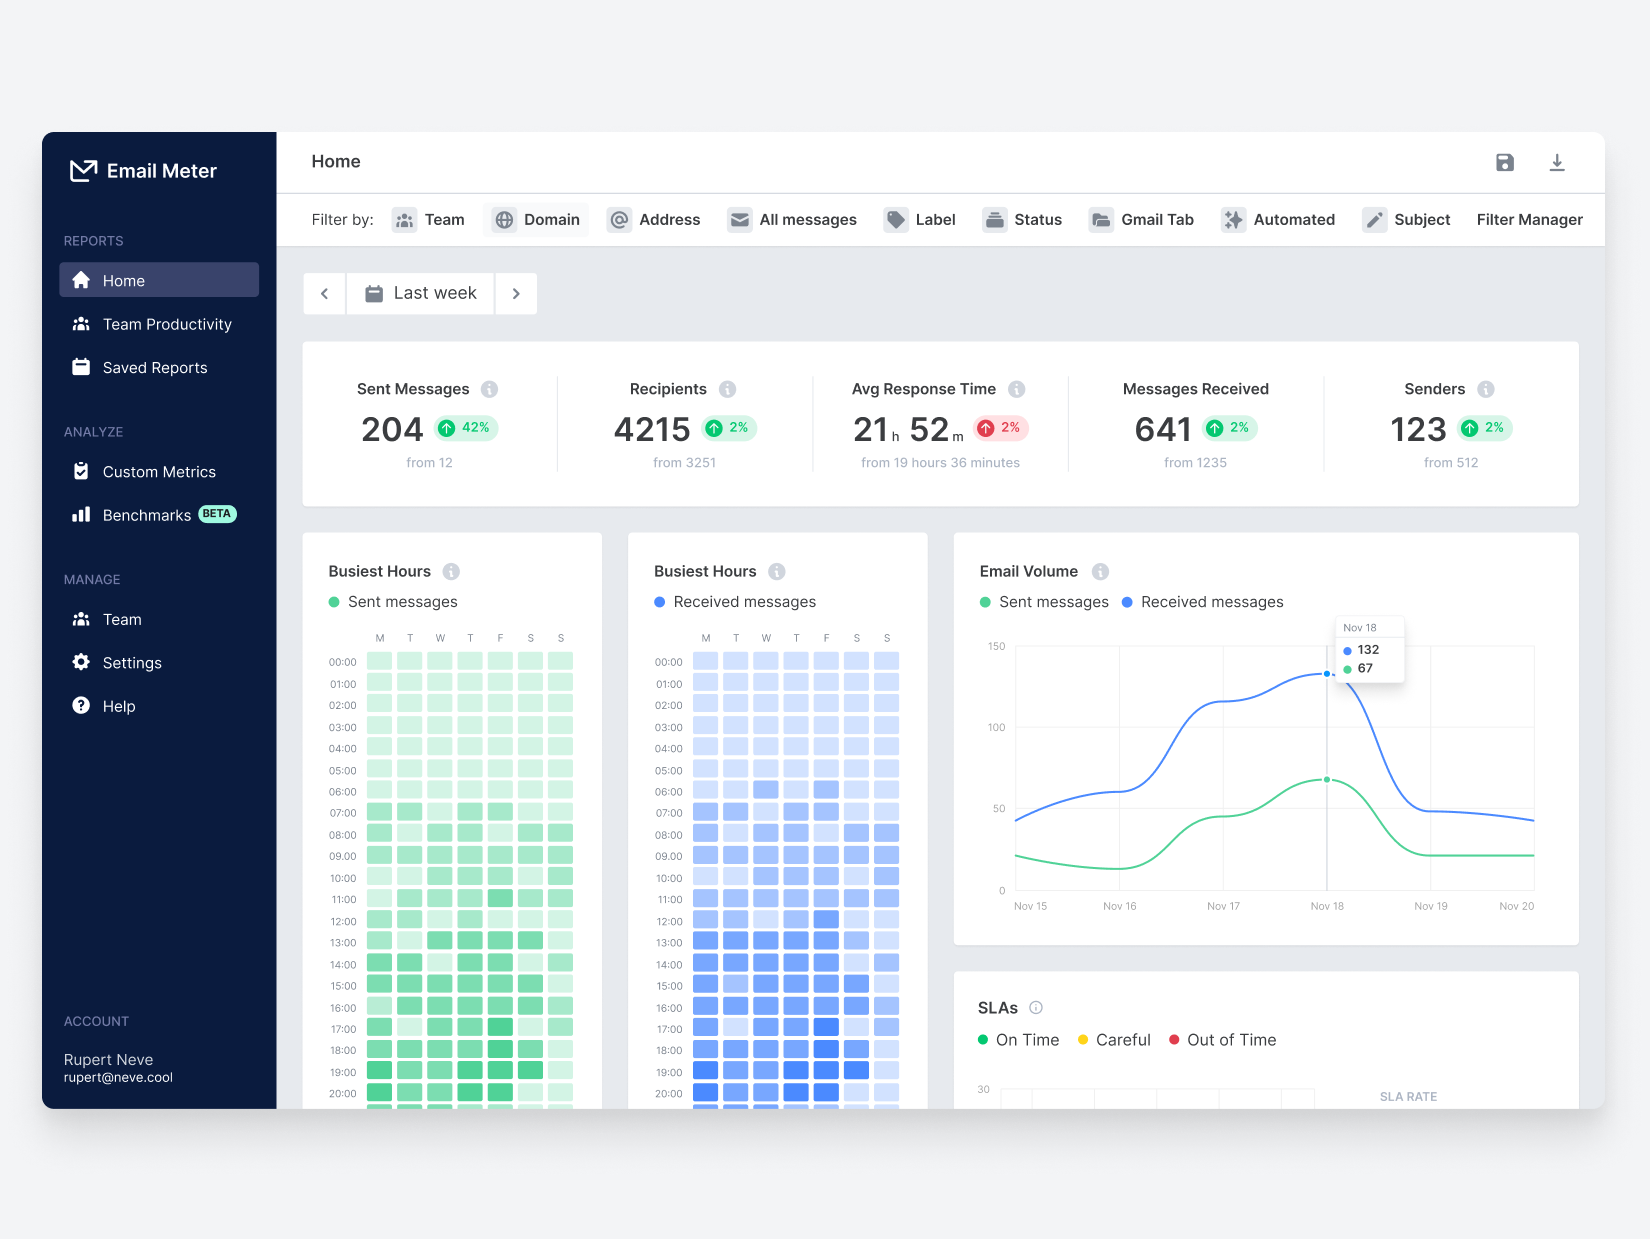 See all your team's email metrics in an easy-to-understand dashboard